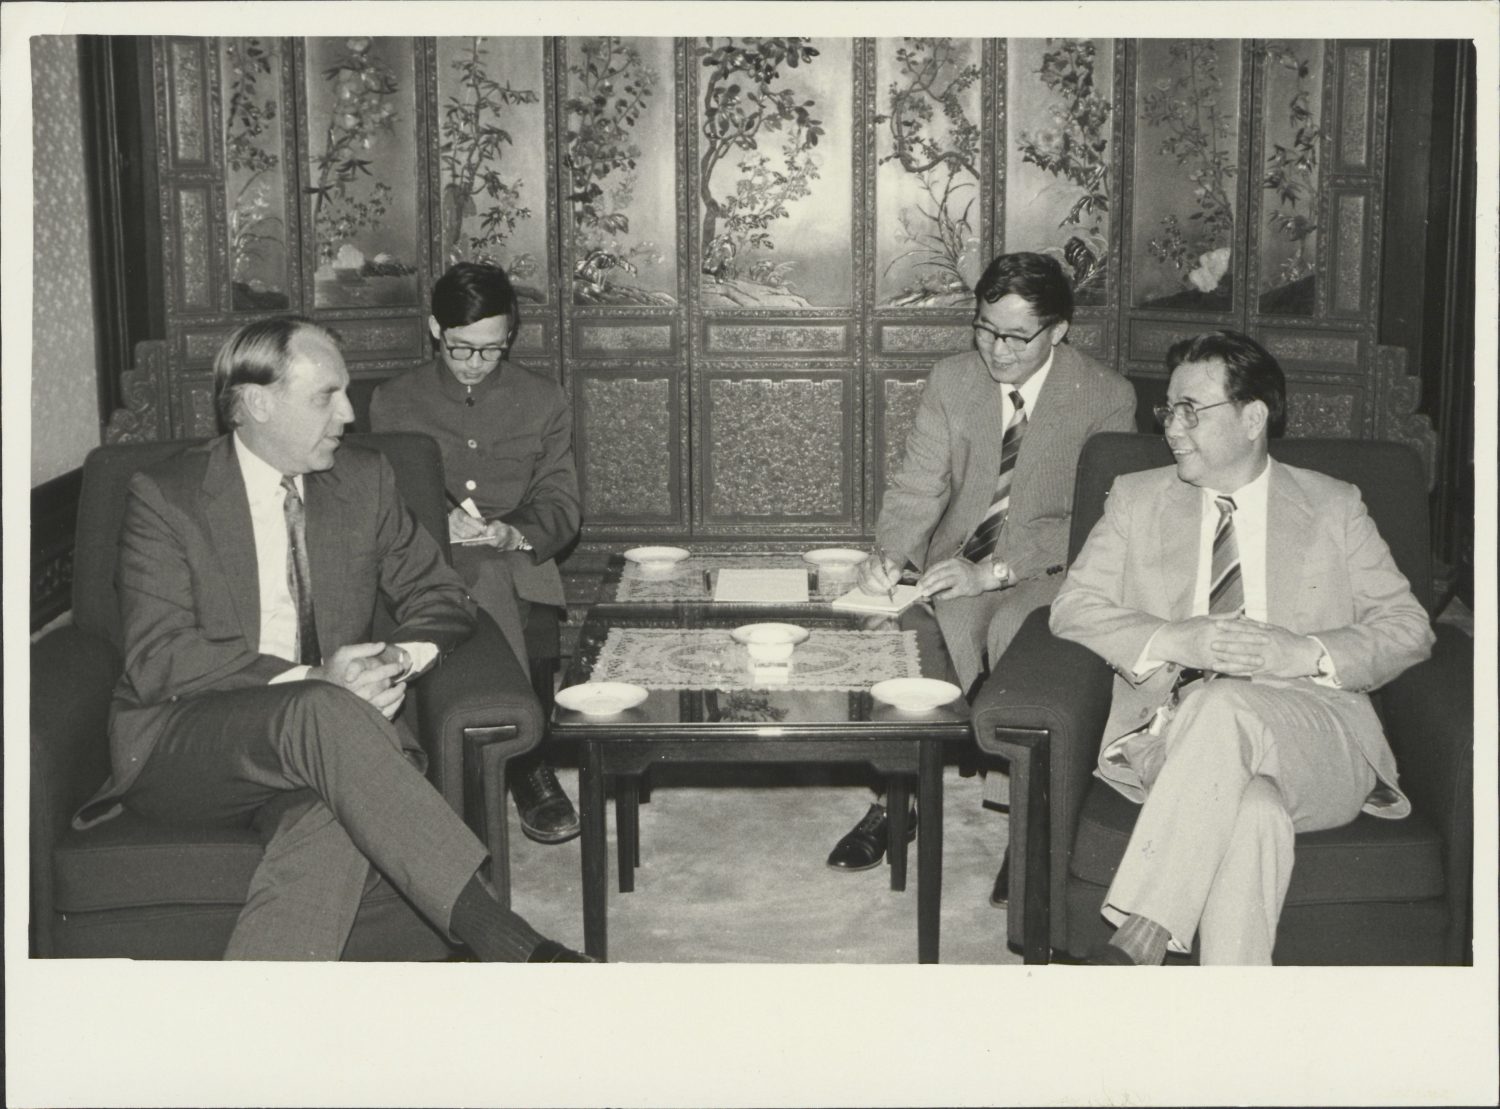 Hewlett-Packard CEO John Young speaks with Chinese officials during a visit to China in 1984.